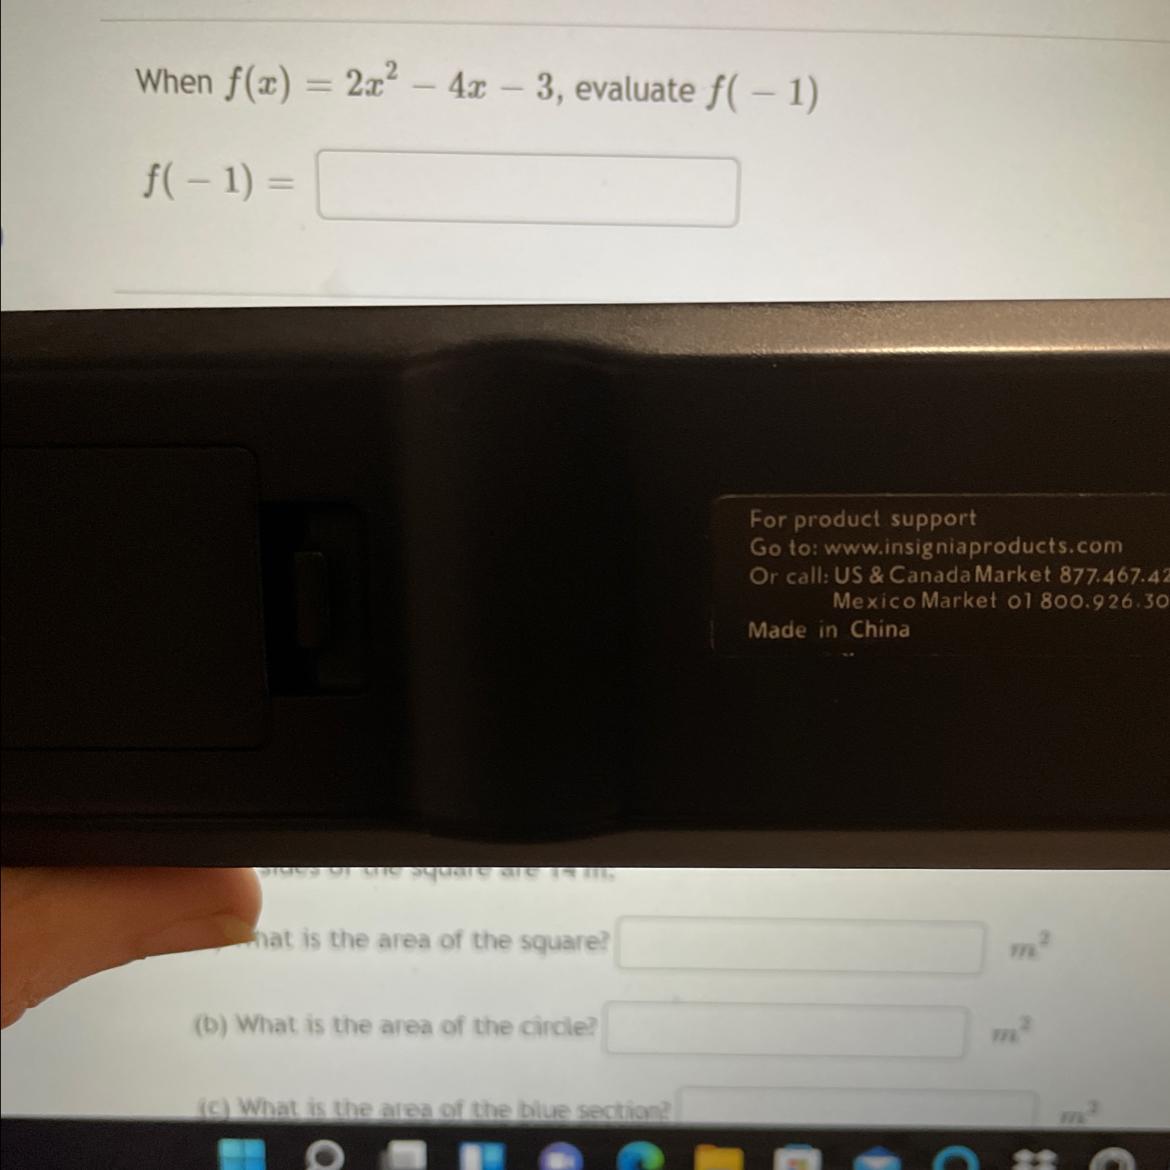 Can You Please Help Me Figure Out How To Do This?